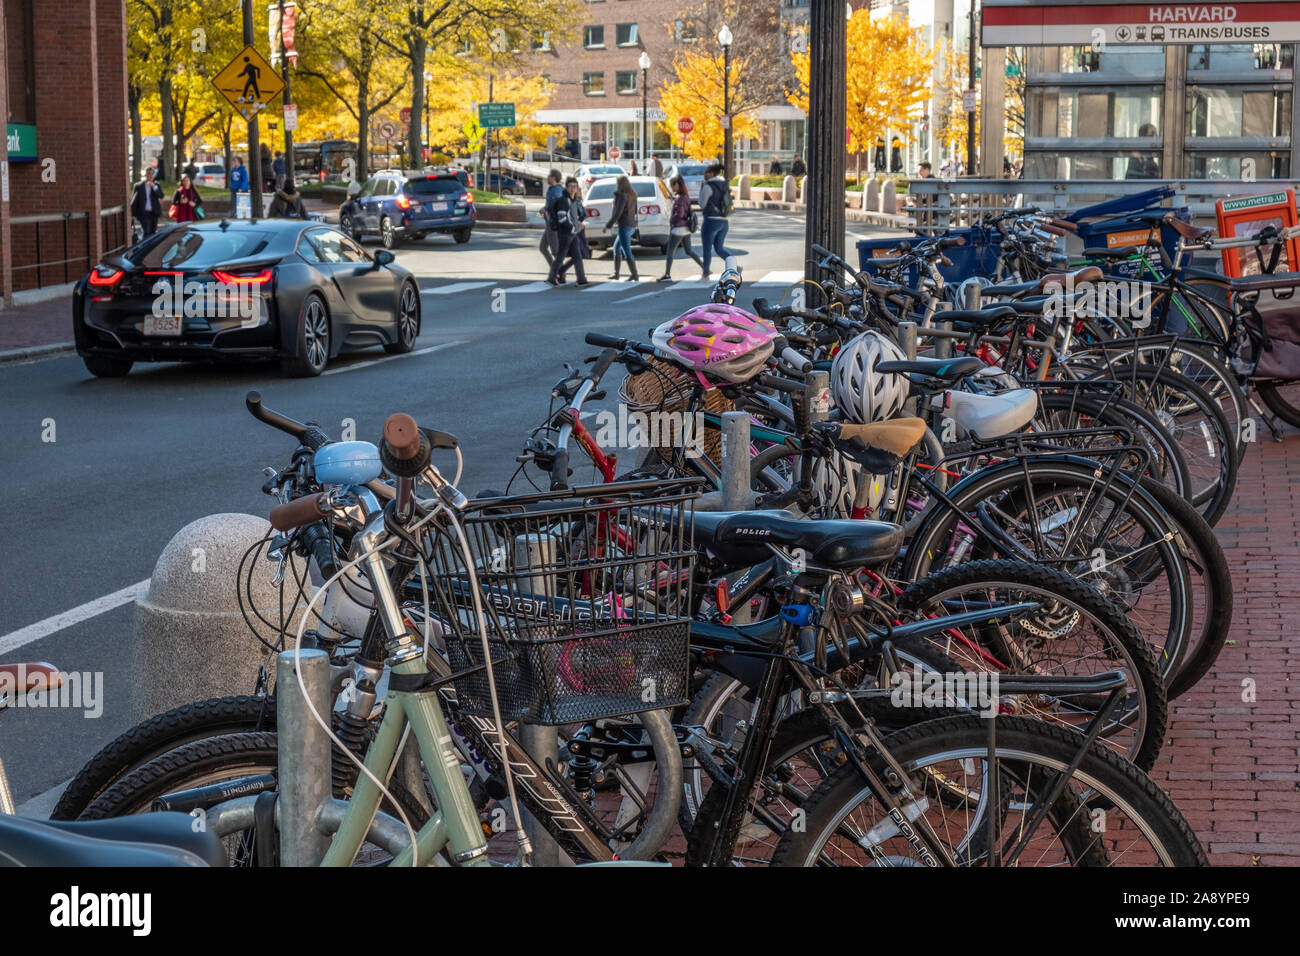 Bicycles for rent in Harvard Square Stock Photo